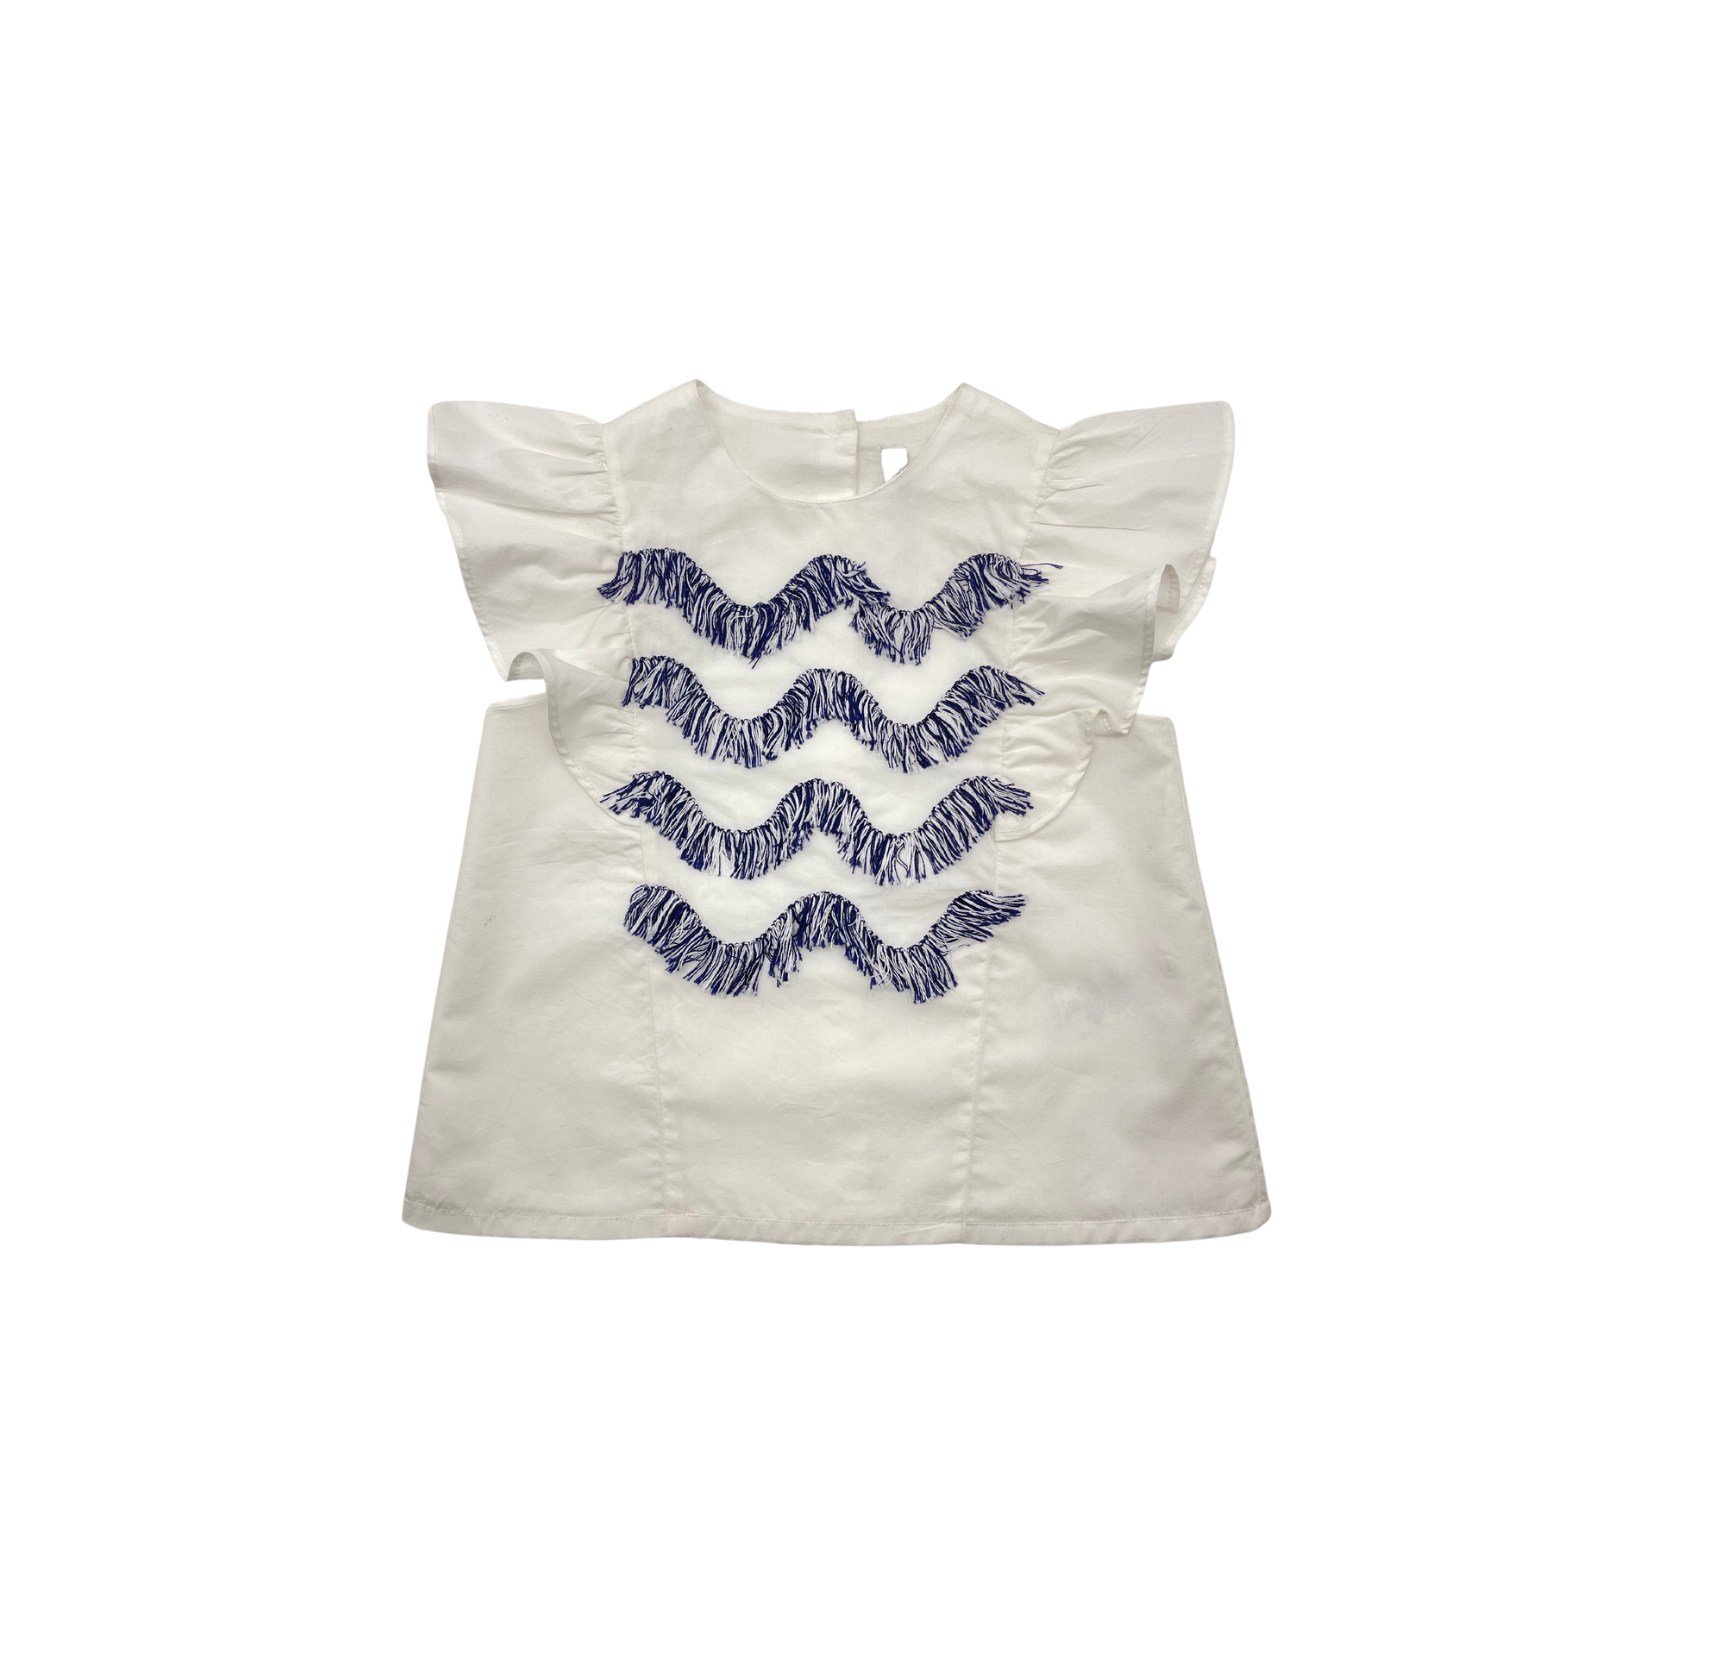 IL GUFO - White blouse with fringes - 4 years old